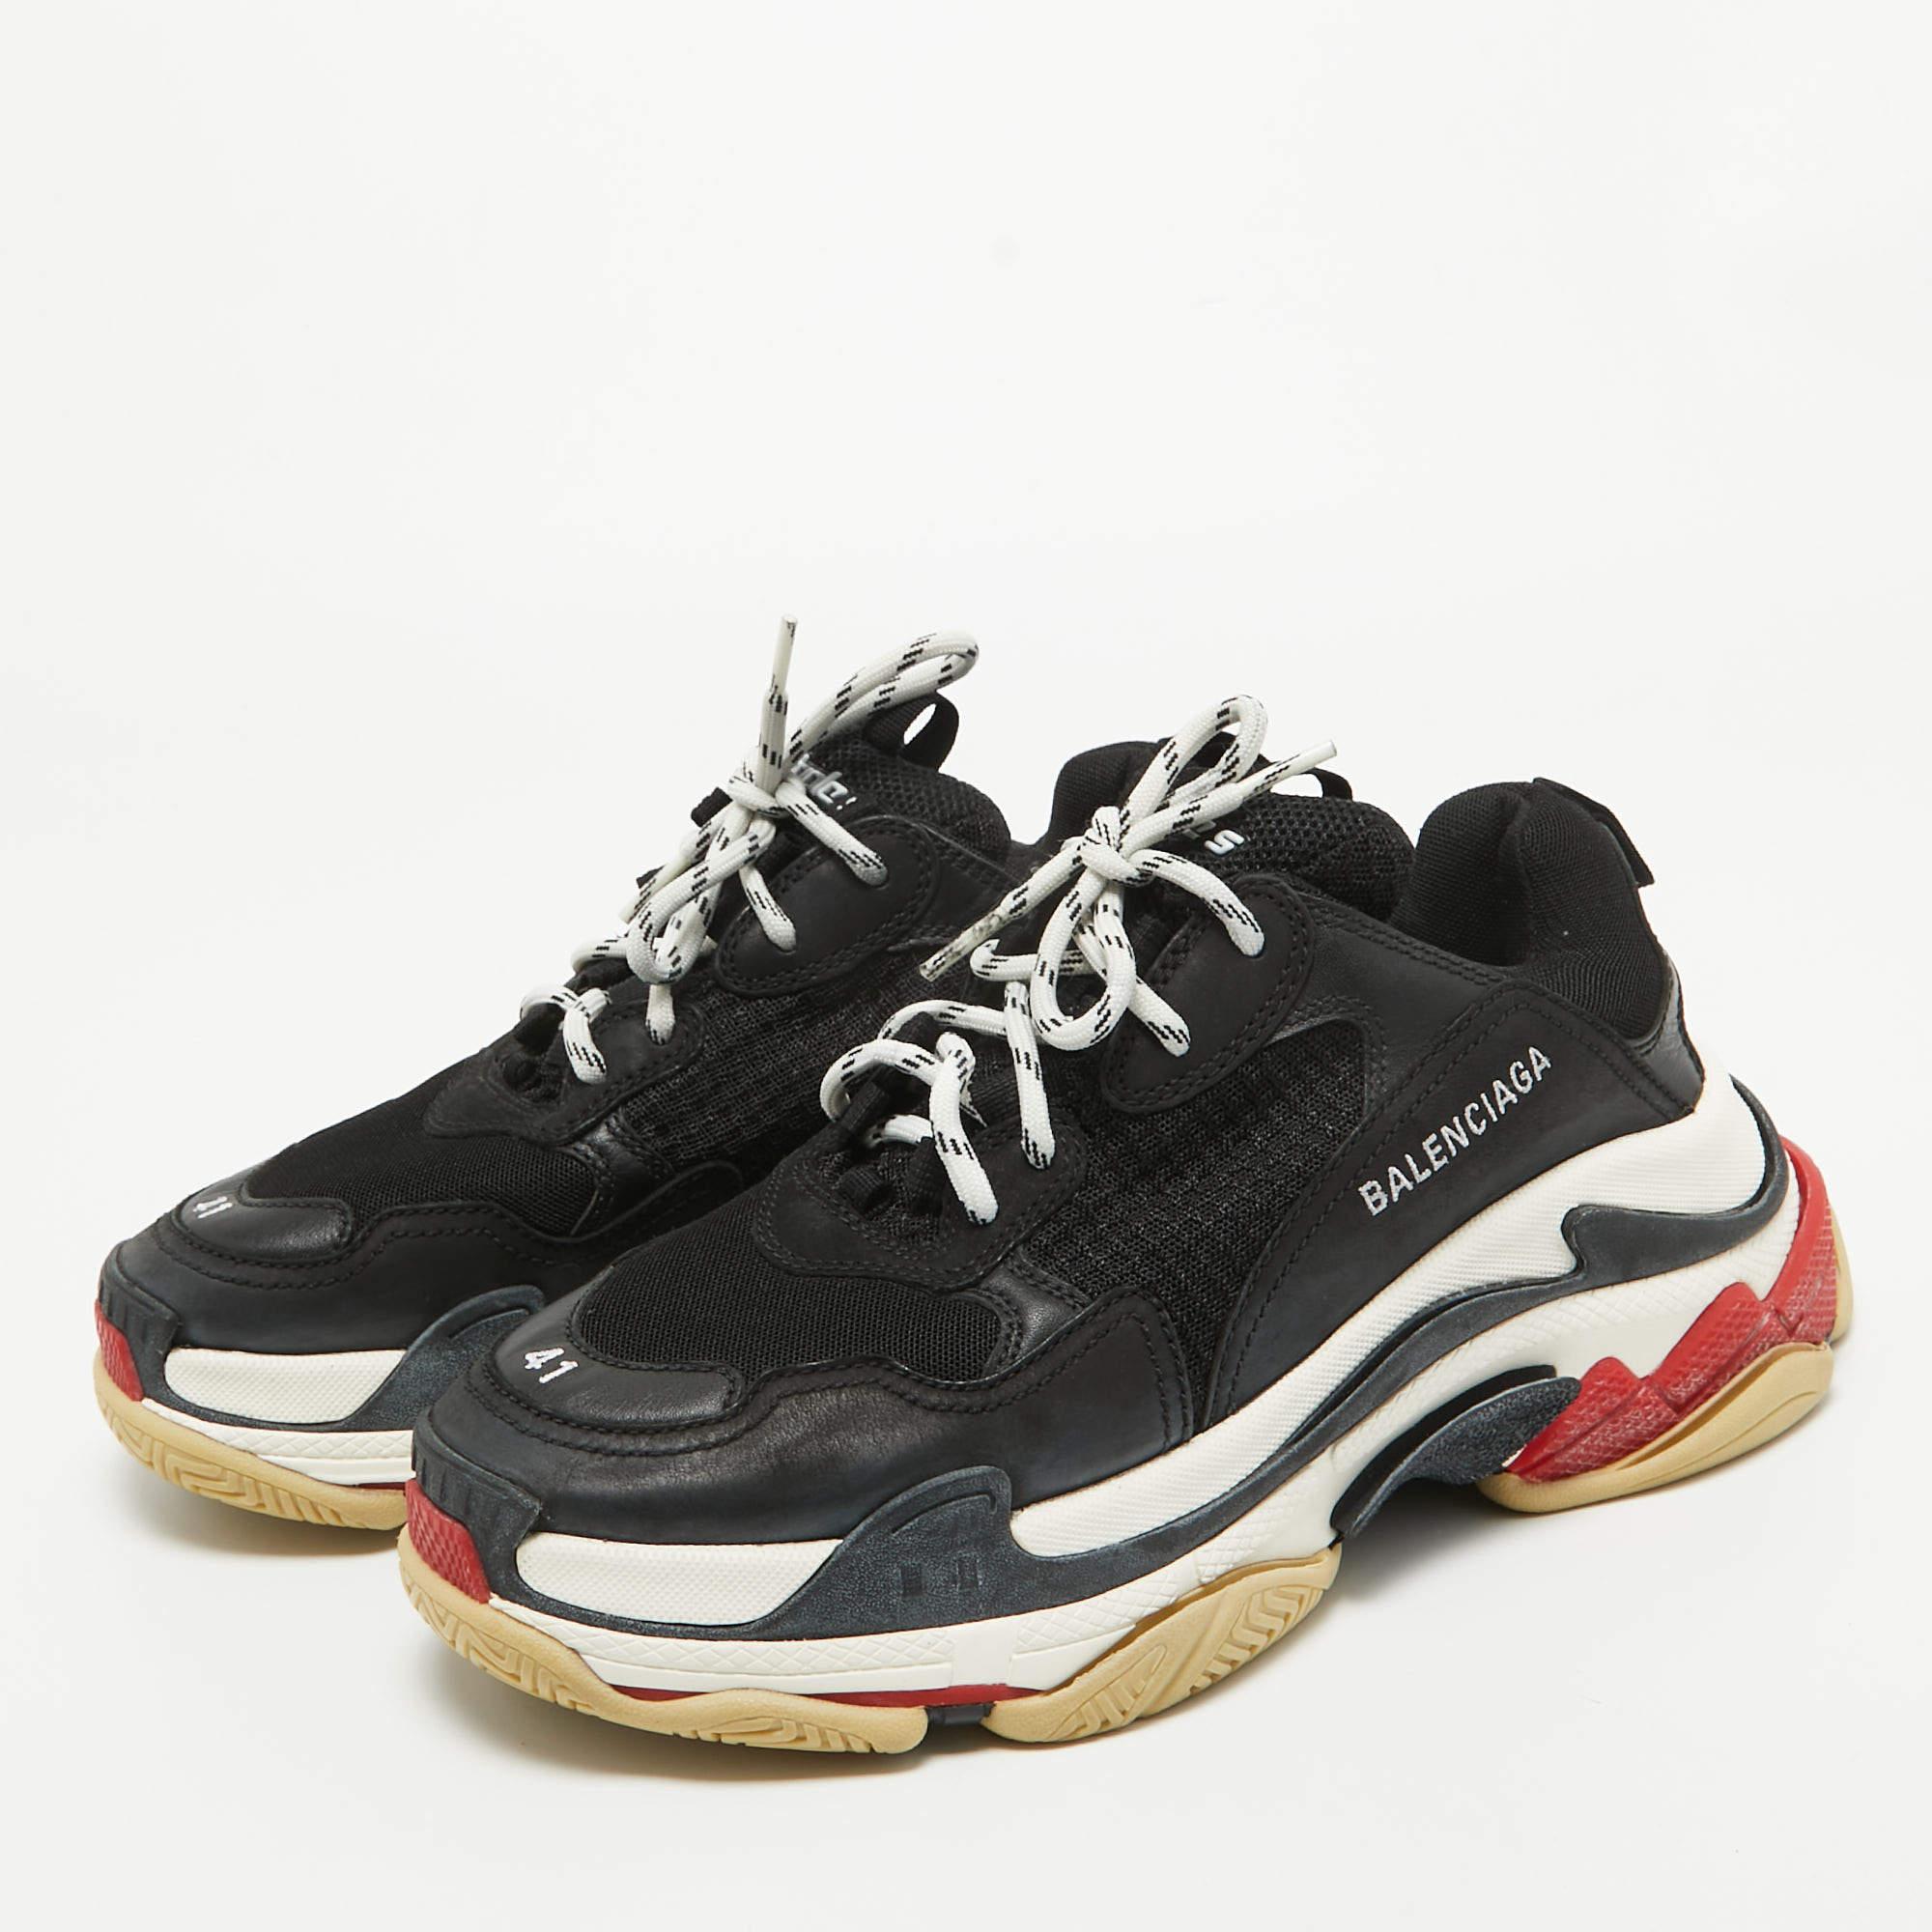 Balenciaga Black Mesh and Leather Triple S Low Top Sneakers Size 40 For Sale 3